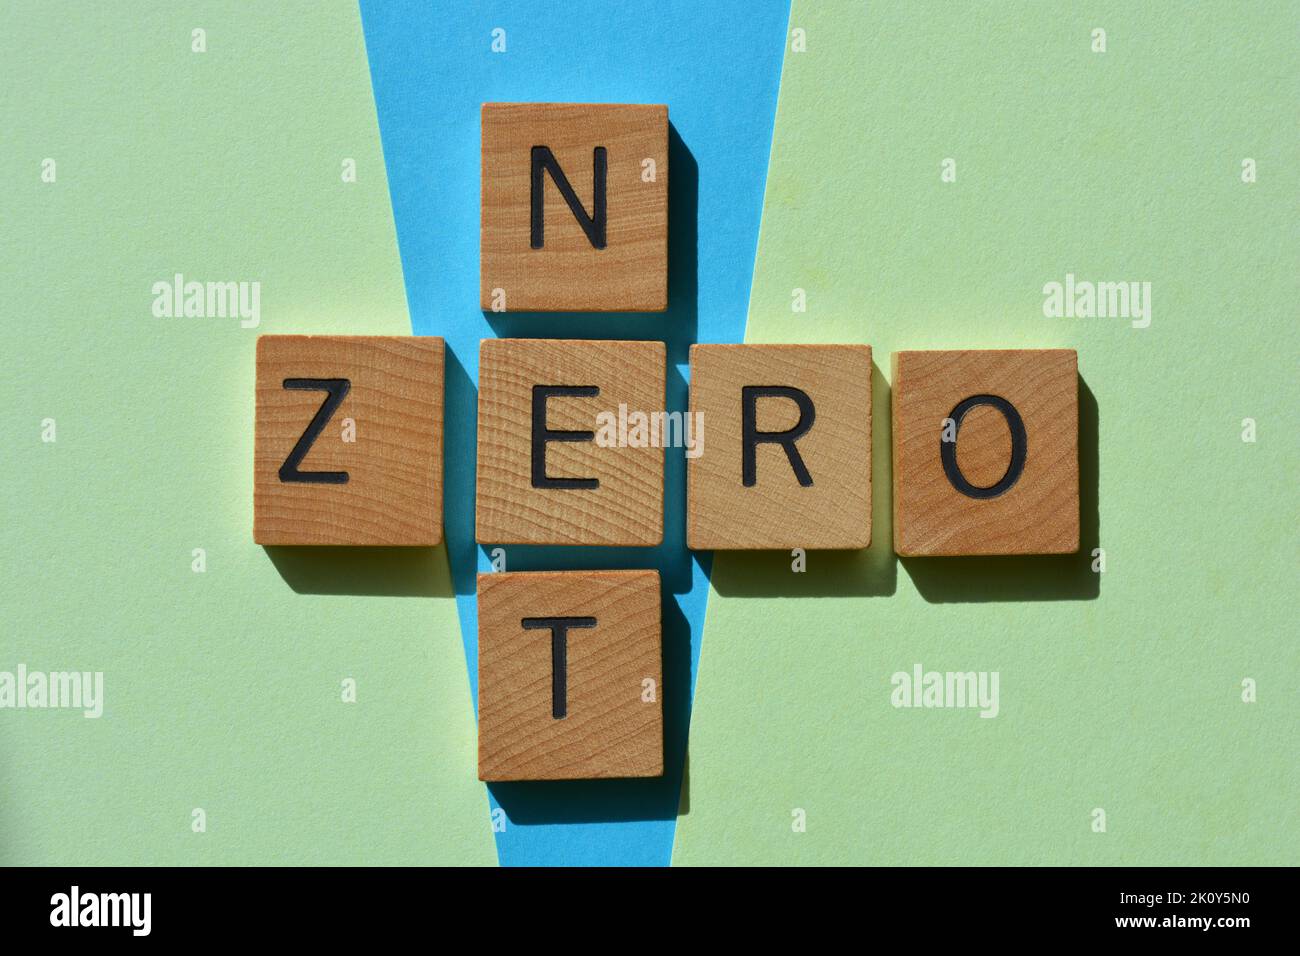 Net Zero, words in wooden alphabet letters in crossword form on blue and green background Stock Photo